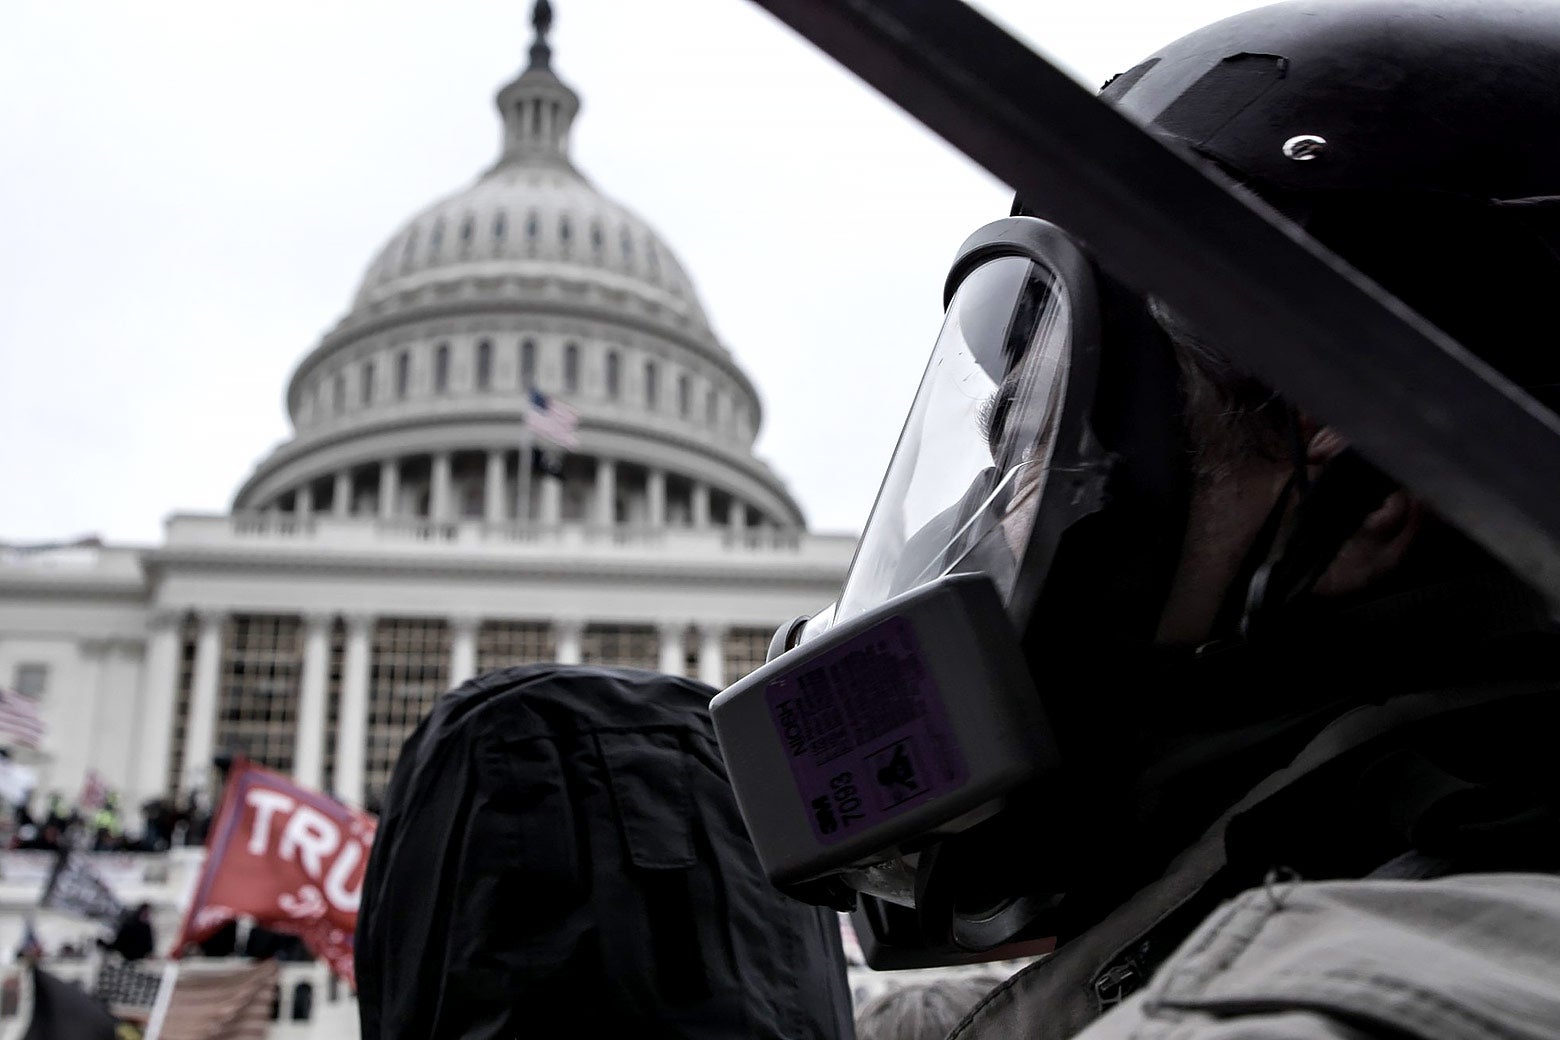 A still from the documentary The Sixth of a person wearing riot gear in front of the U.S. Capitol on Jan. 6, 2021.